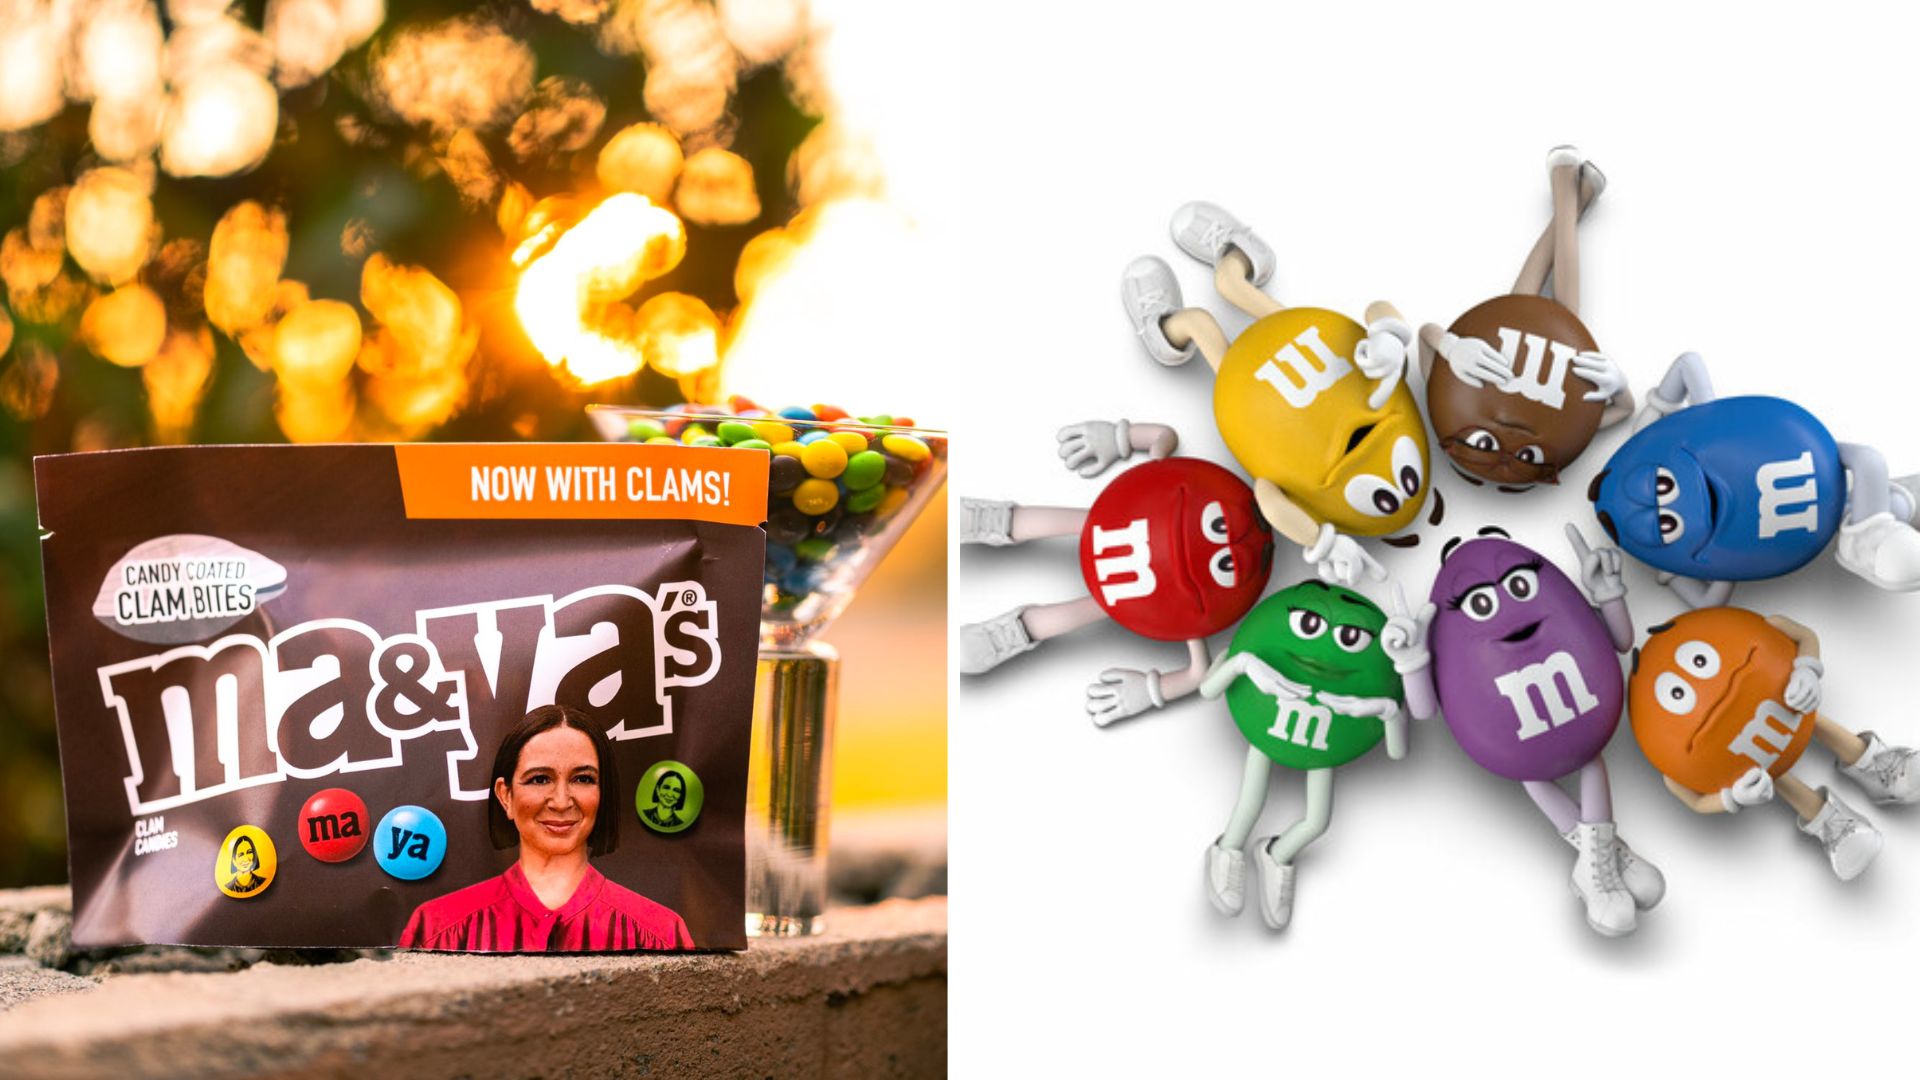 M&M's spokescandies are 'back for good' after Maya Rudolph's Super